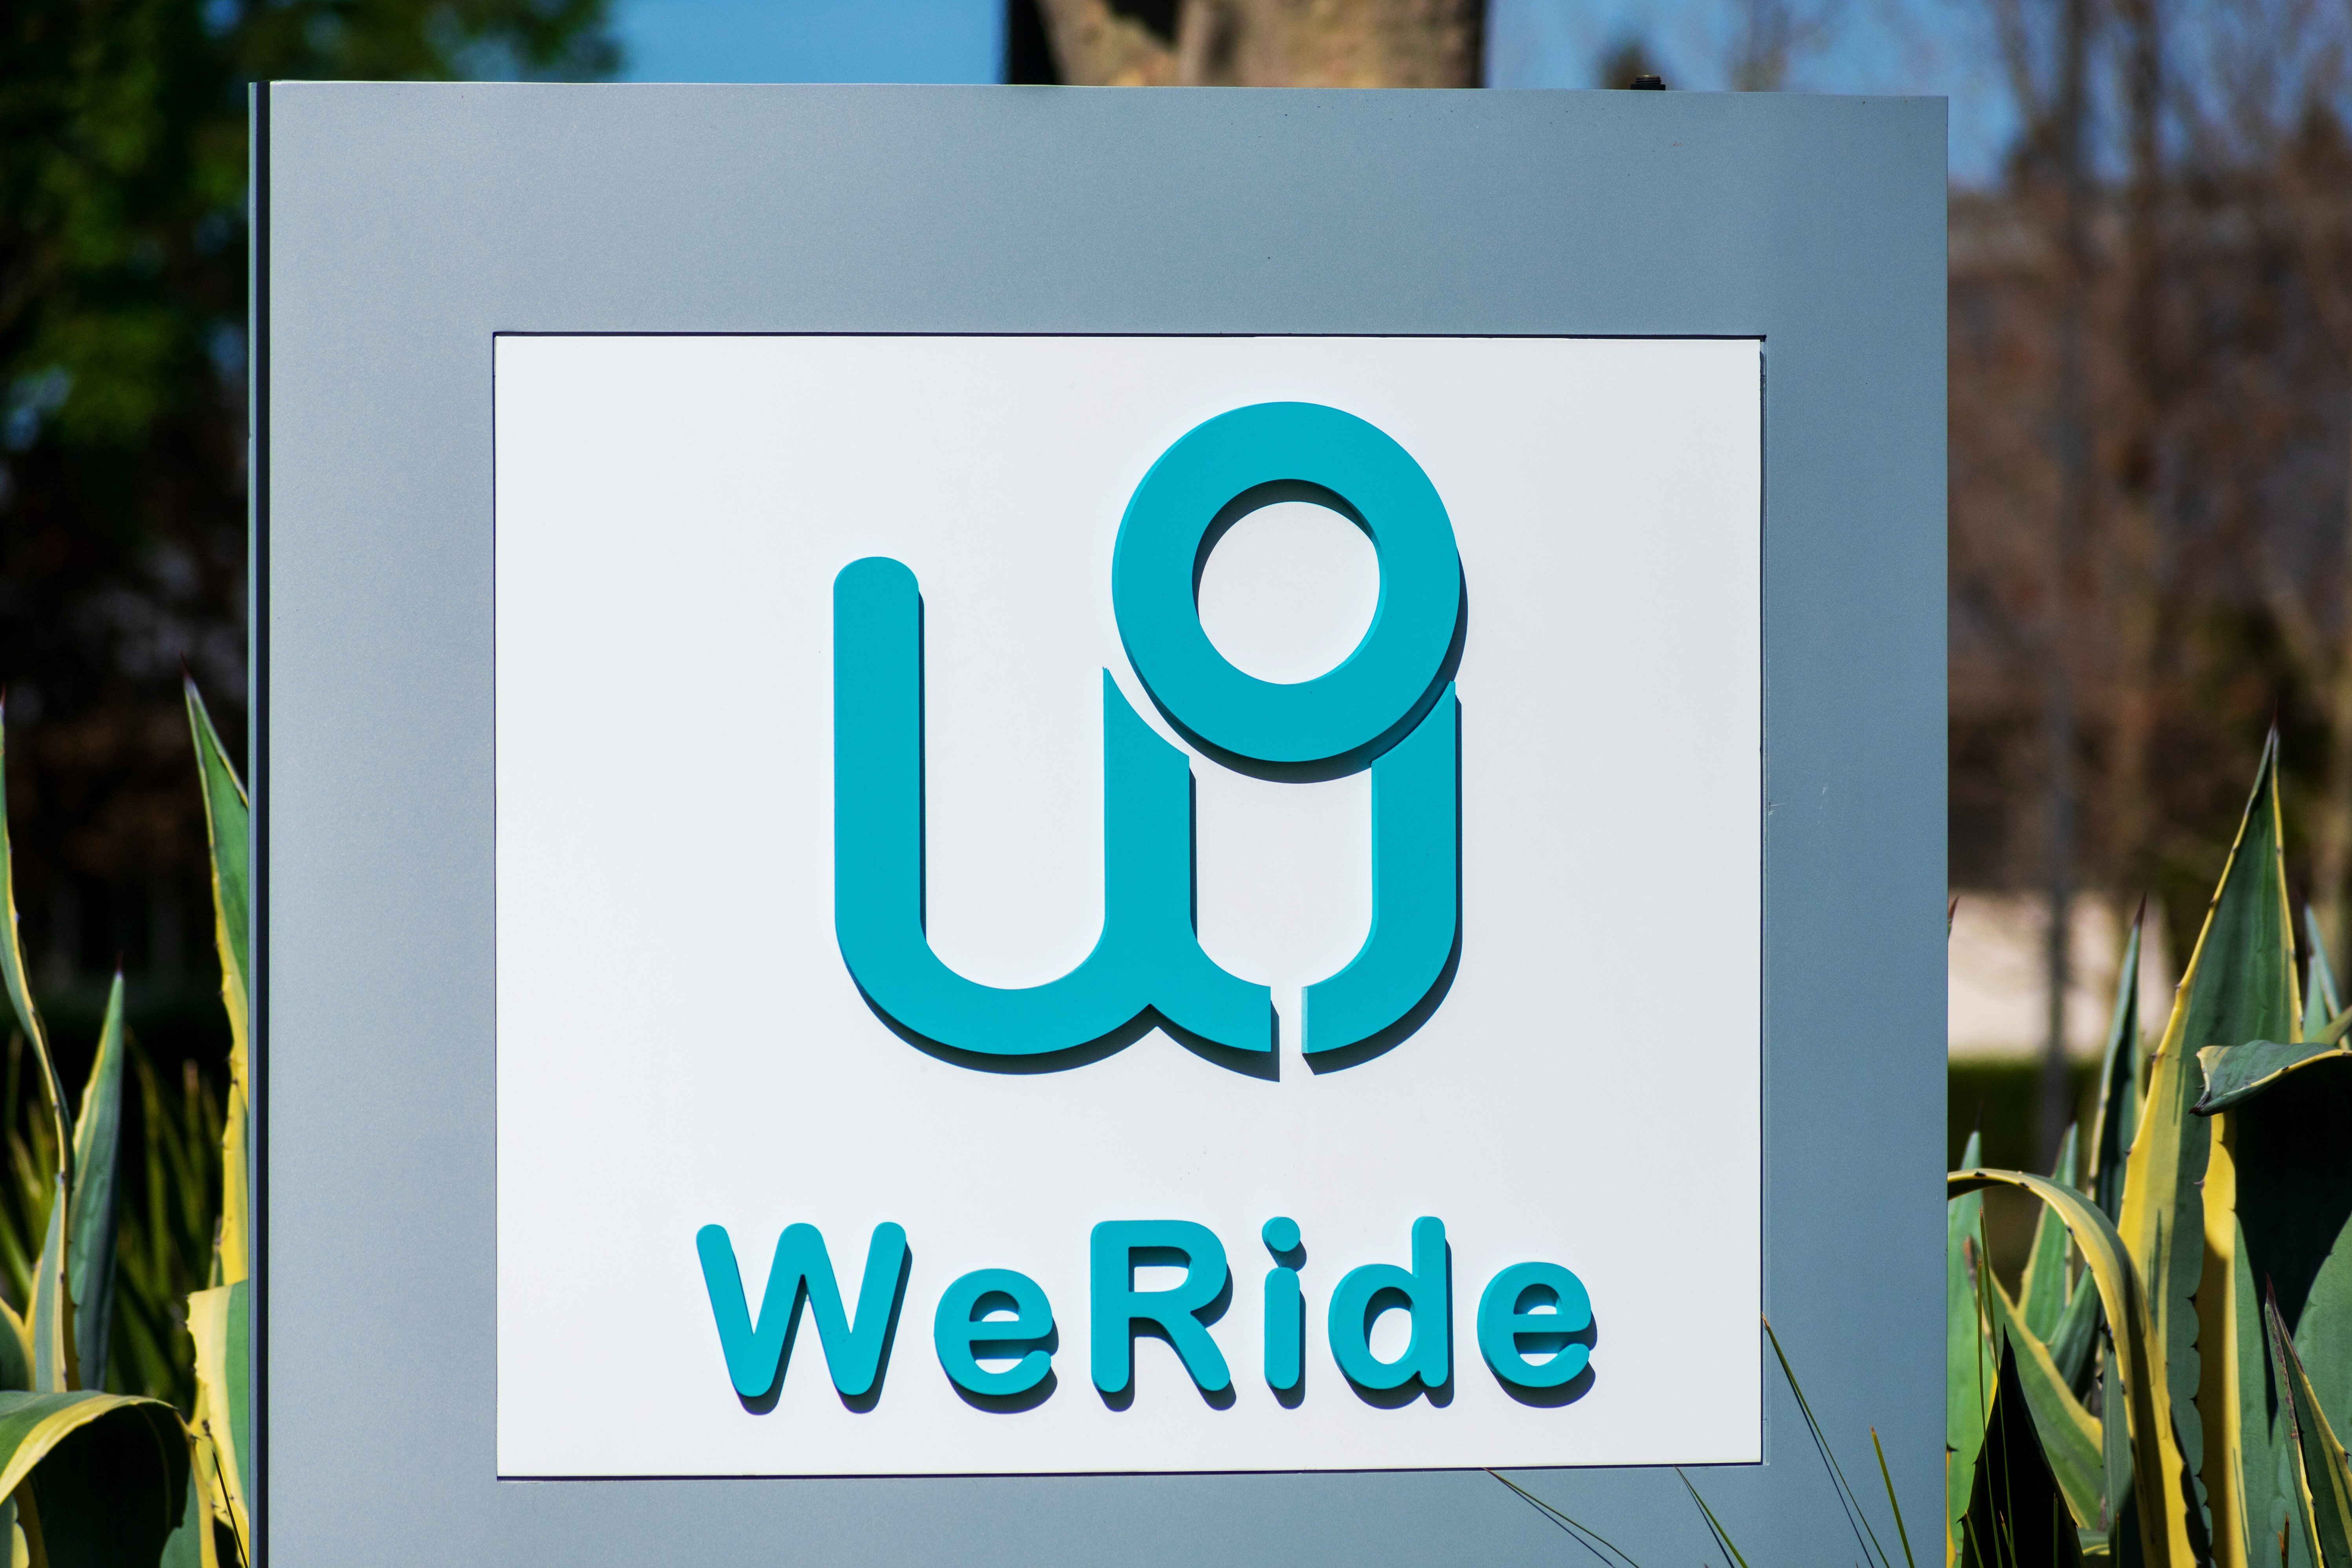 WeRide’s CEO said there was a ‘high probability’ that it would conduct an initial public offering, but did not elaborate further. Photo: Shutterstock Images